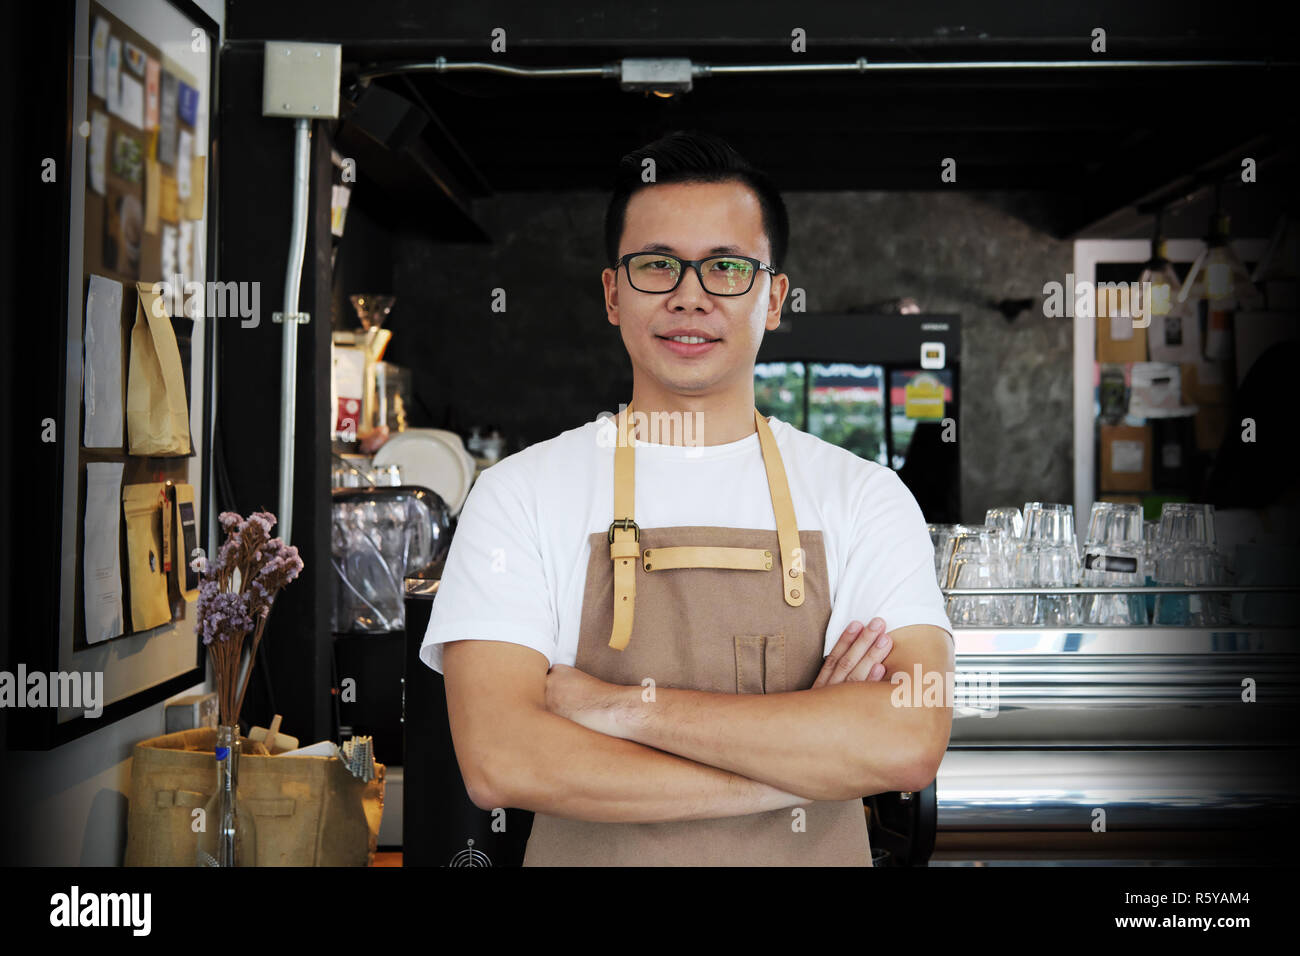 Portrait of smiling asian barista with arms crossed at counter in coffee shop. Cafe restaurant service, food and drink industry concept. Stock Photo